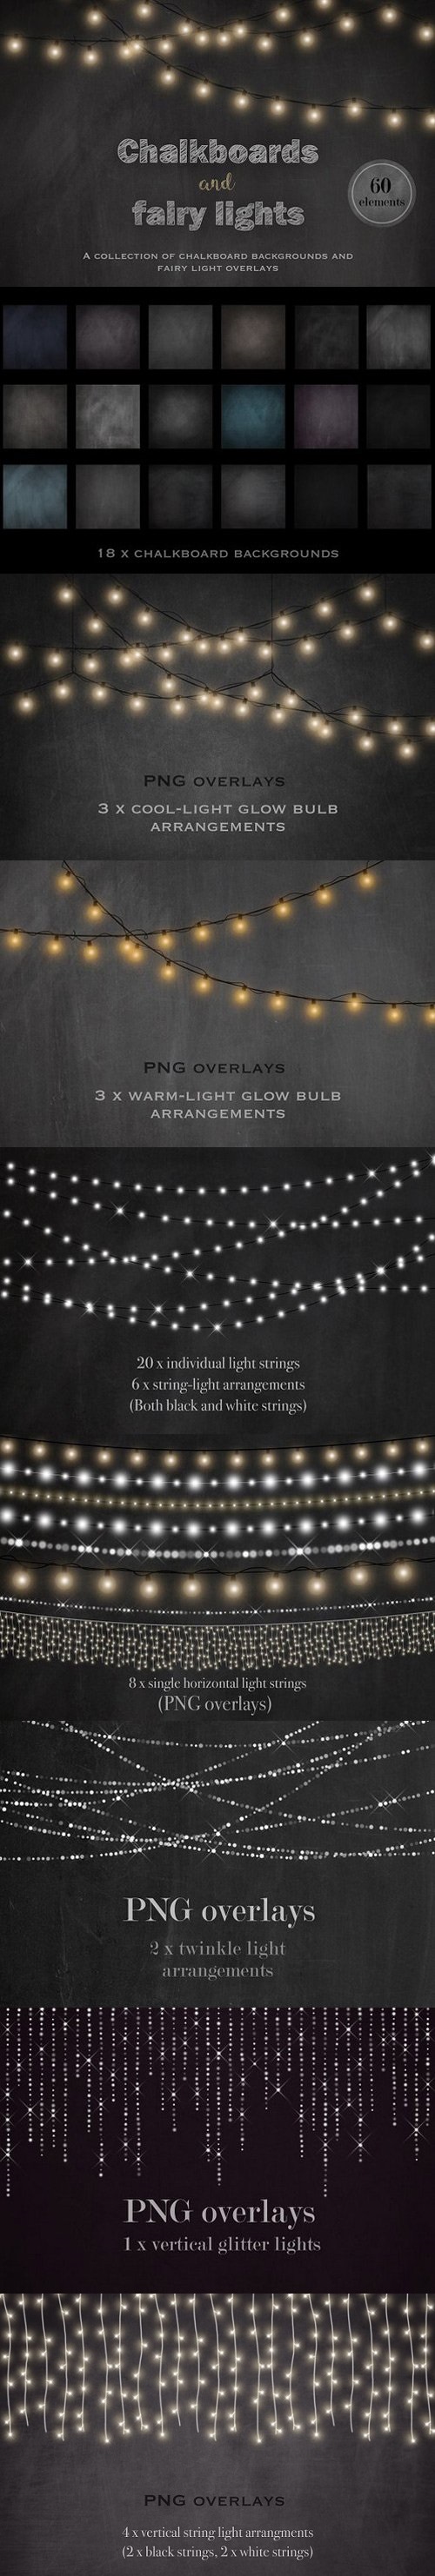 Chalkboards and fairy lights 1482204